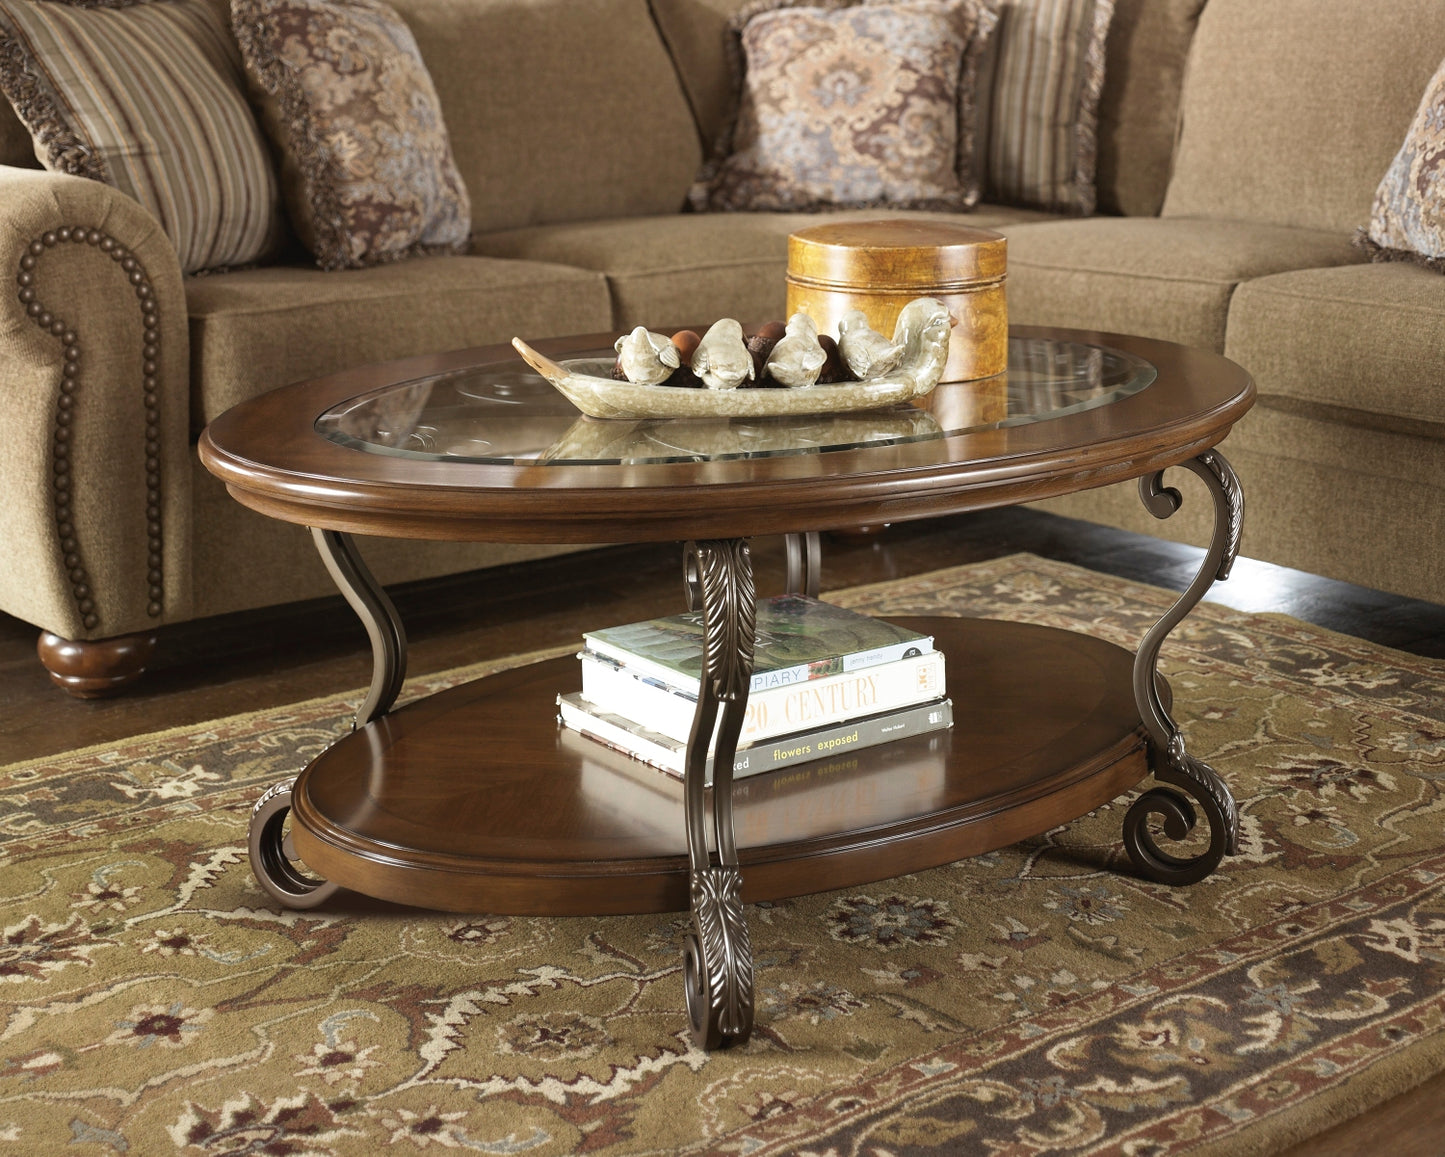 Nestor Coffee Table with 2 End Tables Wilson Furniture (OH)  in Bridgeport, Ohio. Serving Bridgeport, Yorkville, Bellaire, & Avondale